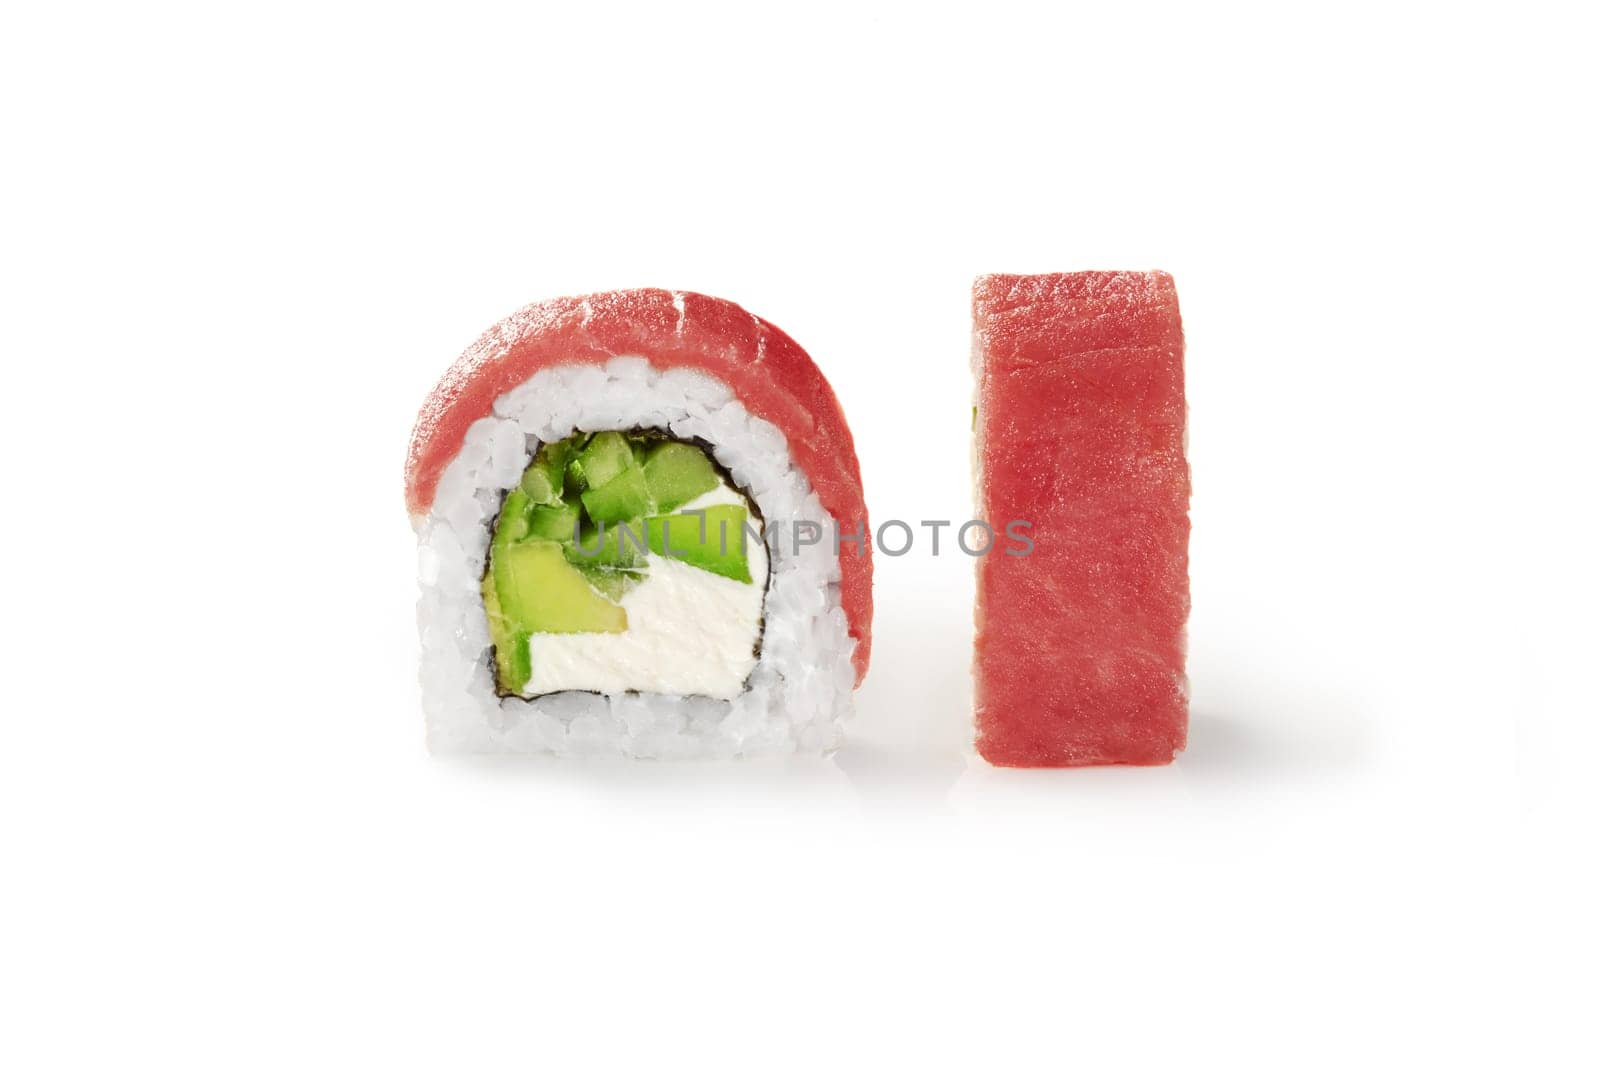 Closeup of delicious tuna sushi roll filled with cream cheese, avocado and cucumber, detailed view isolated on white background. Japanese cuisine